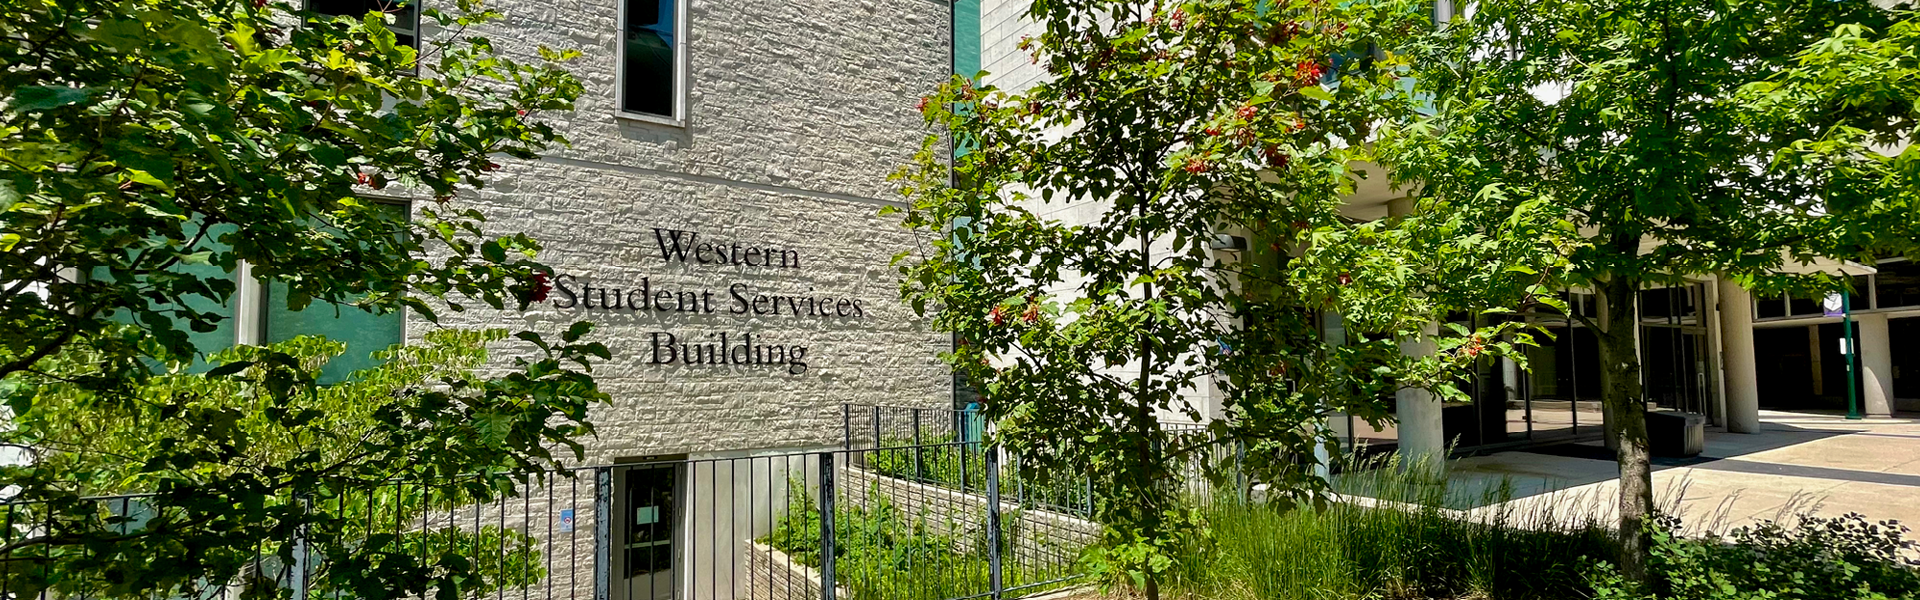 Exterior of Western Student Services Building